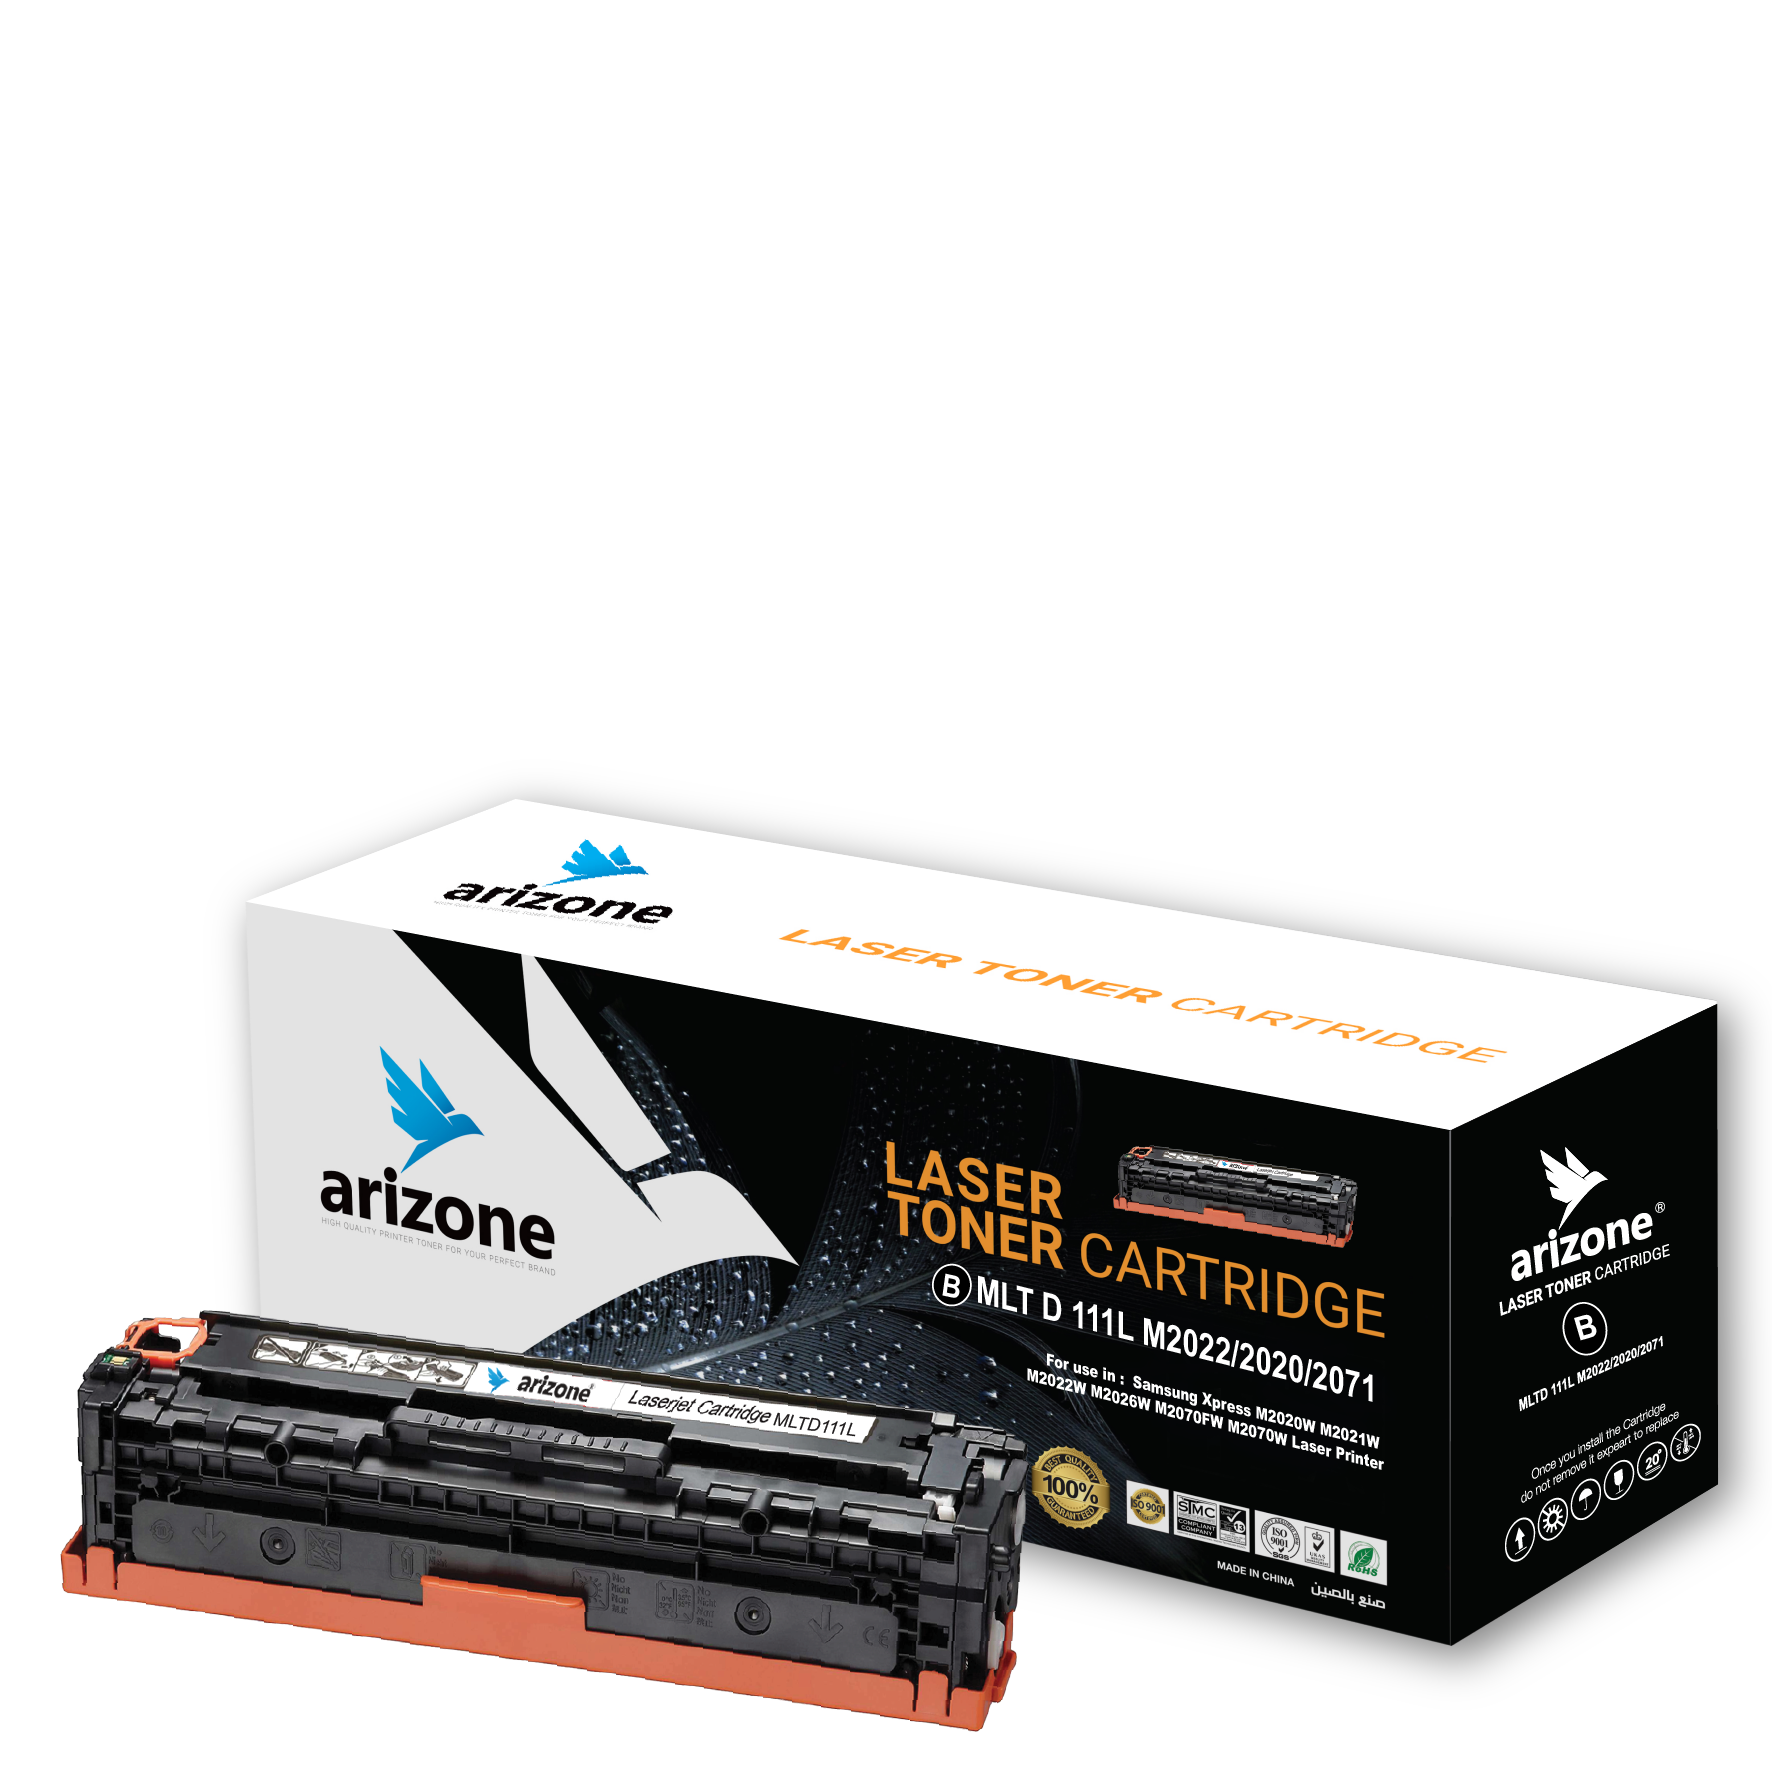 Arizone Toner Cartridge Replacement for Samsung MLT D 111L